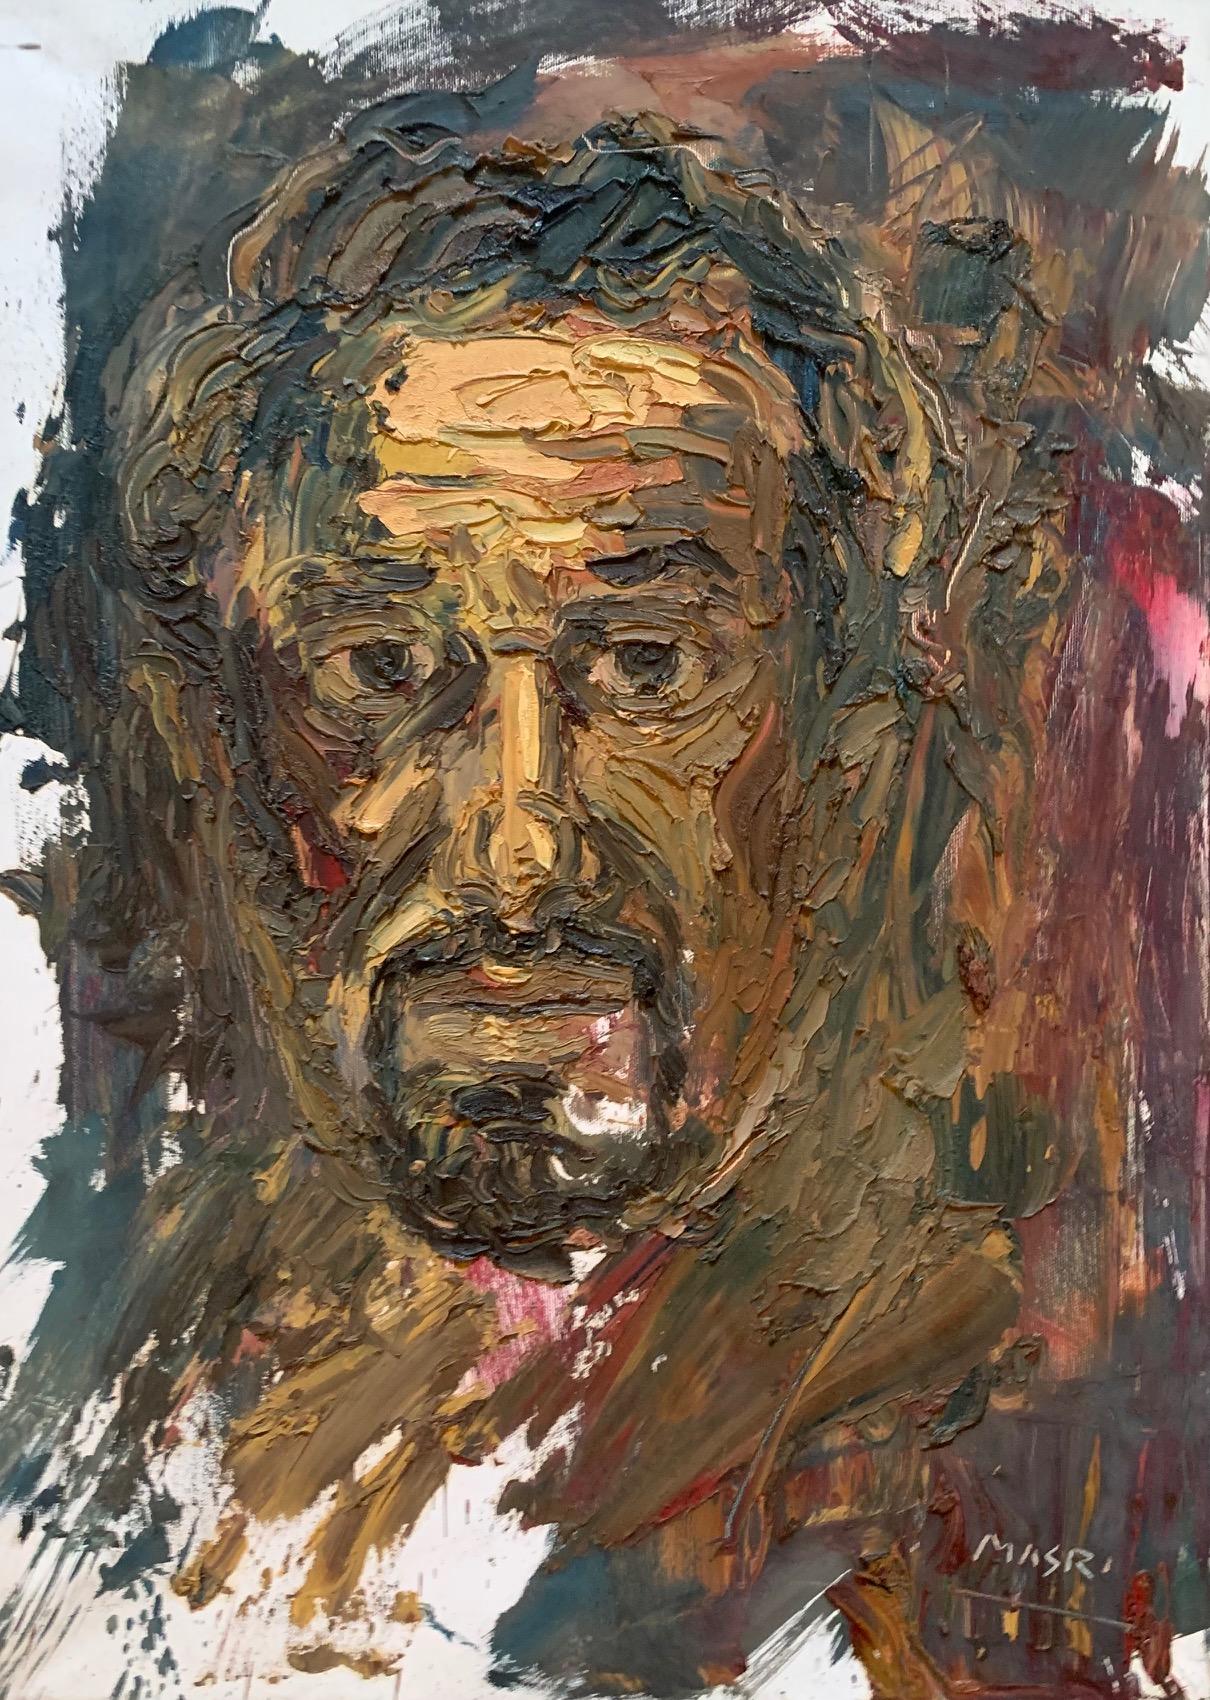 Masri Hayssam Figurative Painting - "Self Portrait in Yellow" Oil on Canvas 20"x28" by Masri